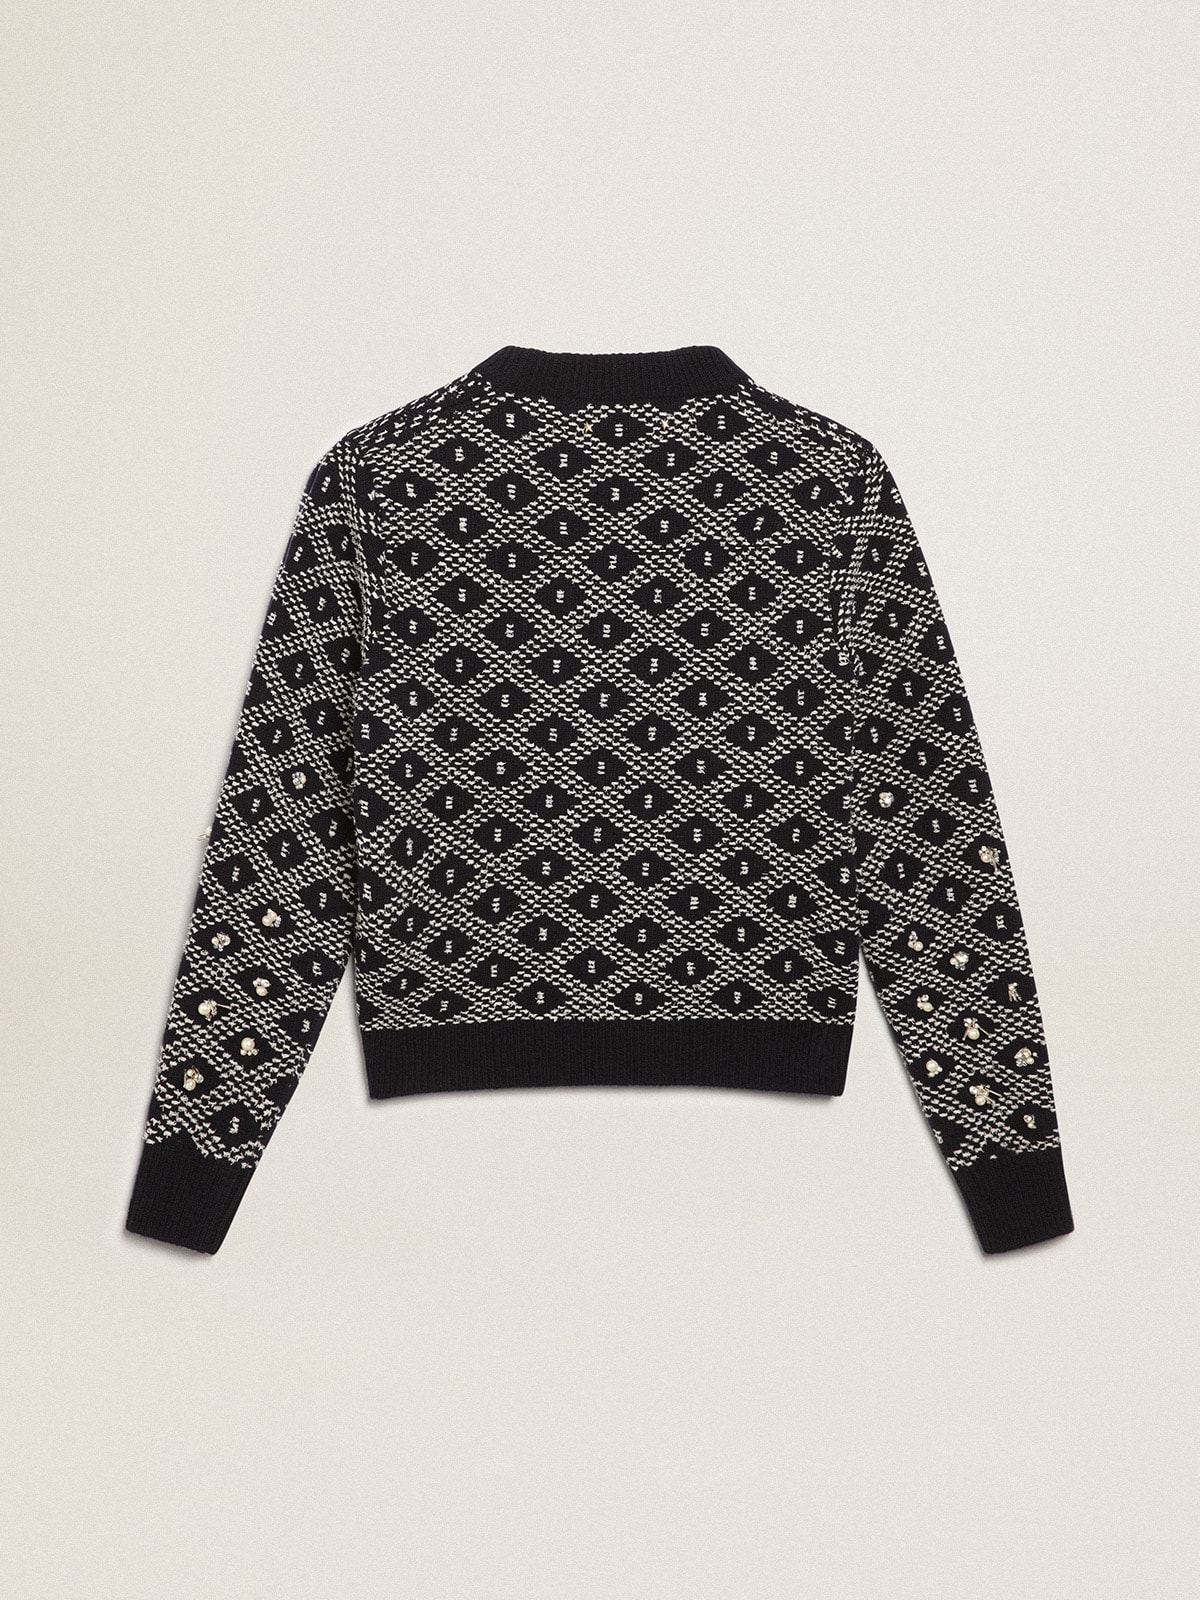 Golden Goose - Women's round-neck sweater with white and blue geometric motifs in 